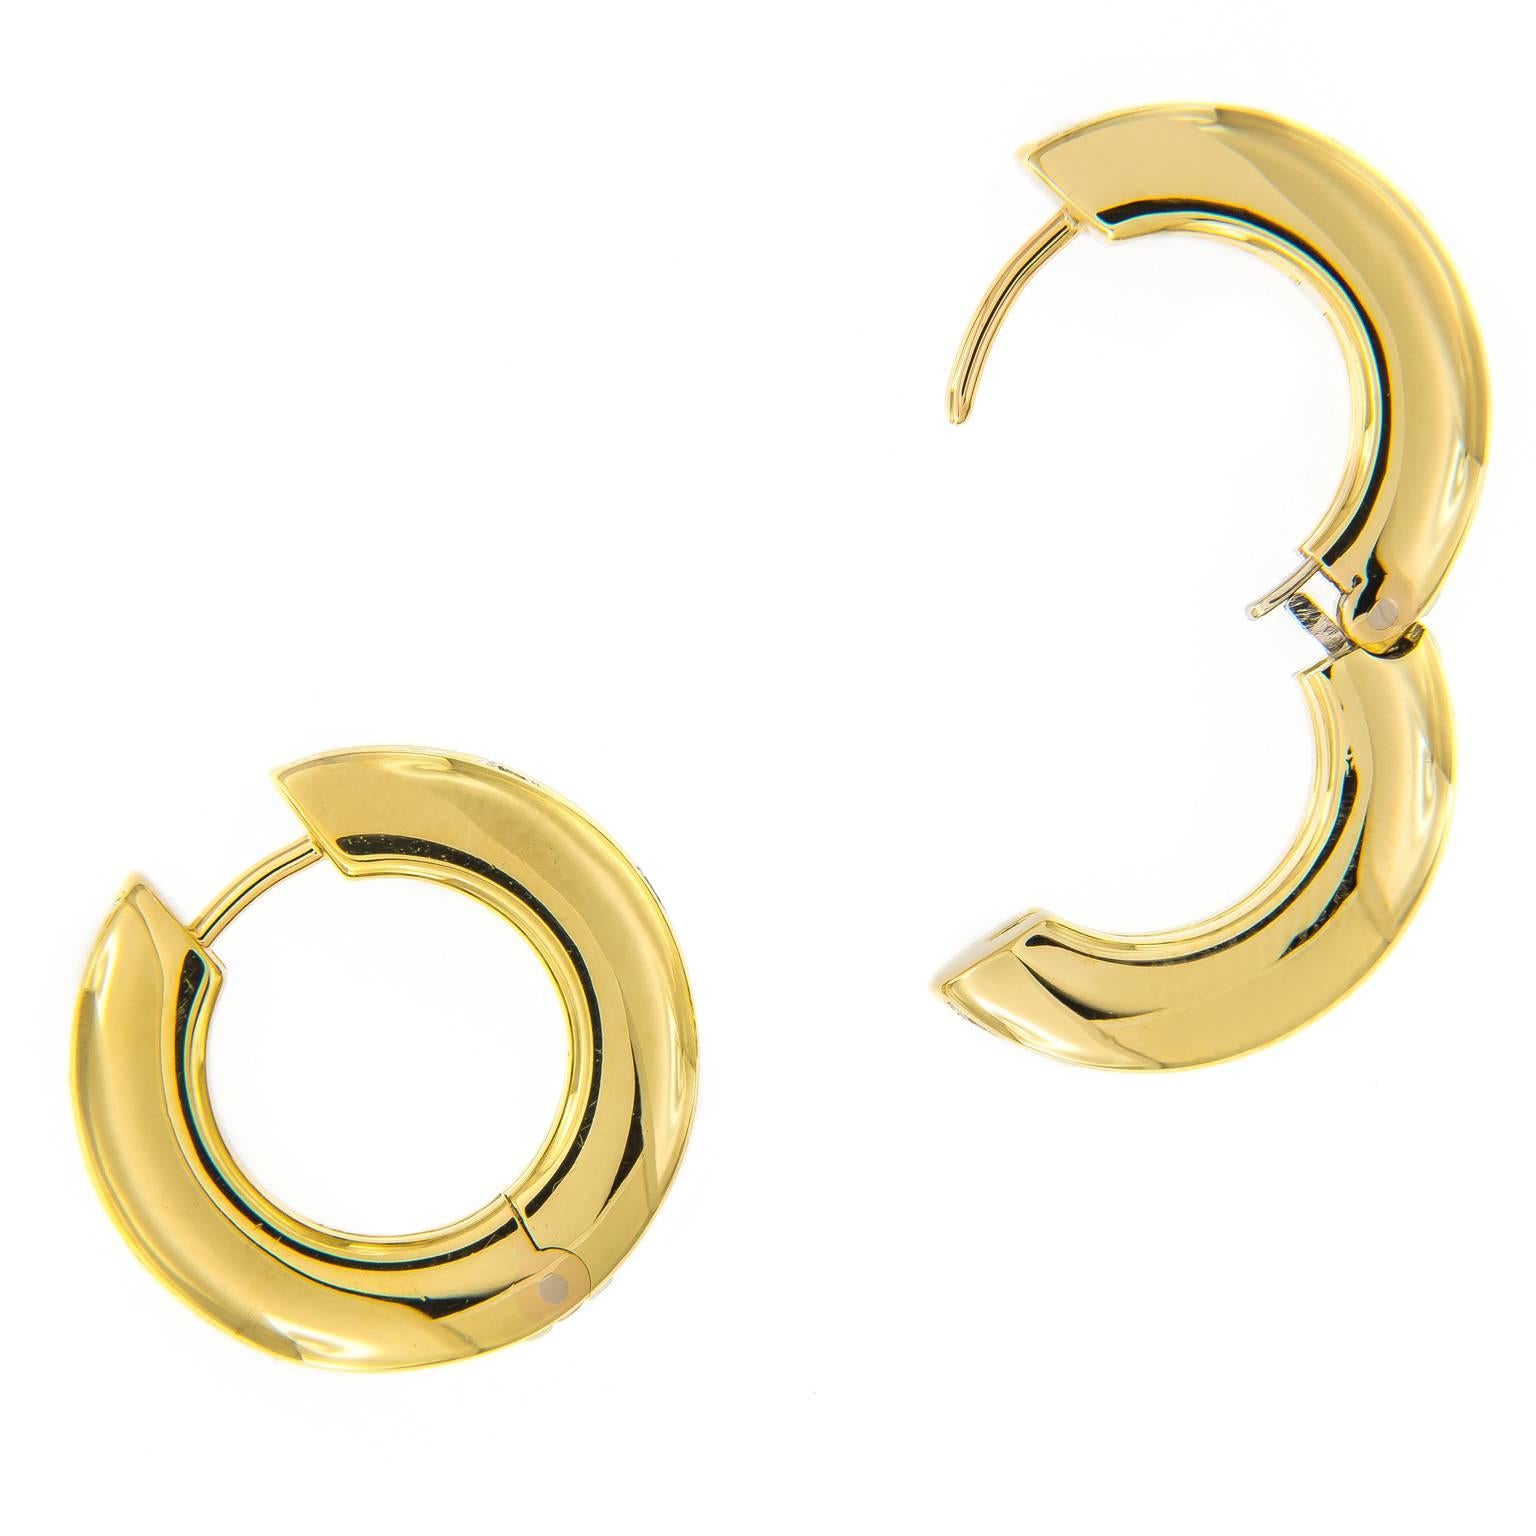 Understated and elegant, these earrings are perfect for a day at the office or an evening out. Showcasing 36 round brilliant cut diamonds and expert craftsmanship in 18k yellow gold with a unique spring hinge. This will be the most comfortable